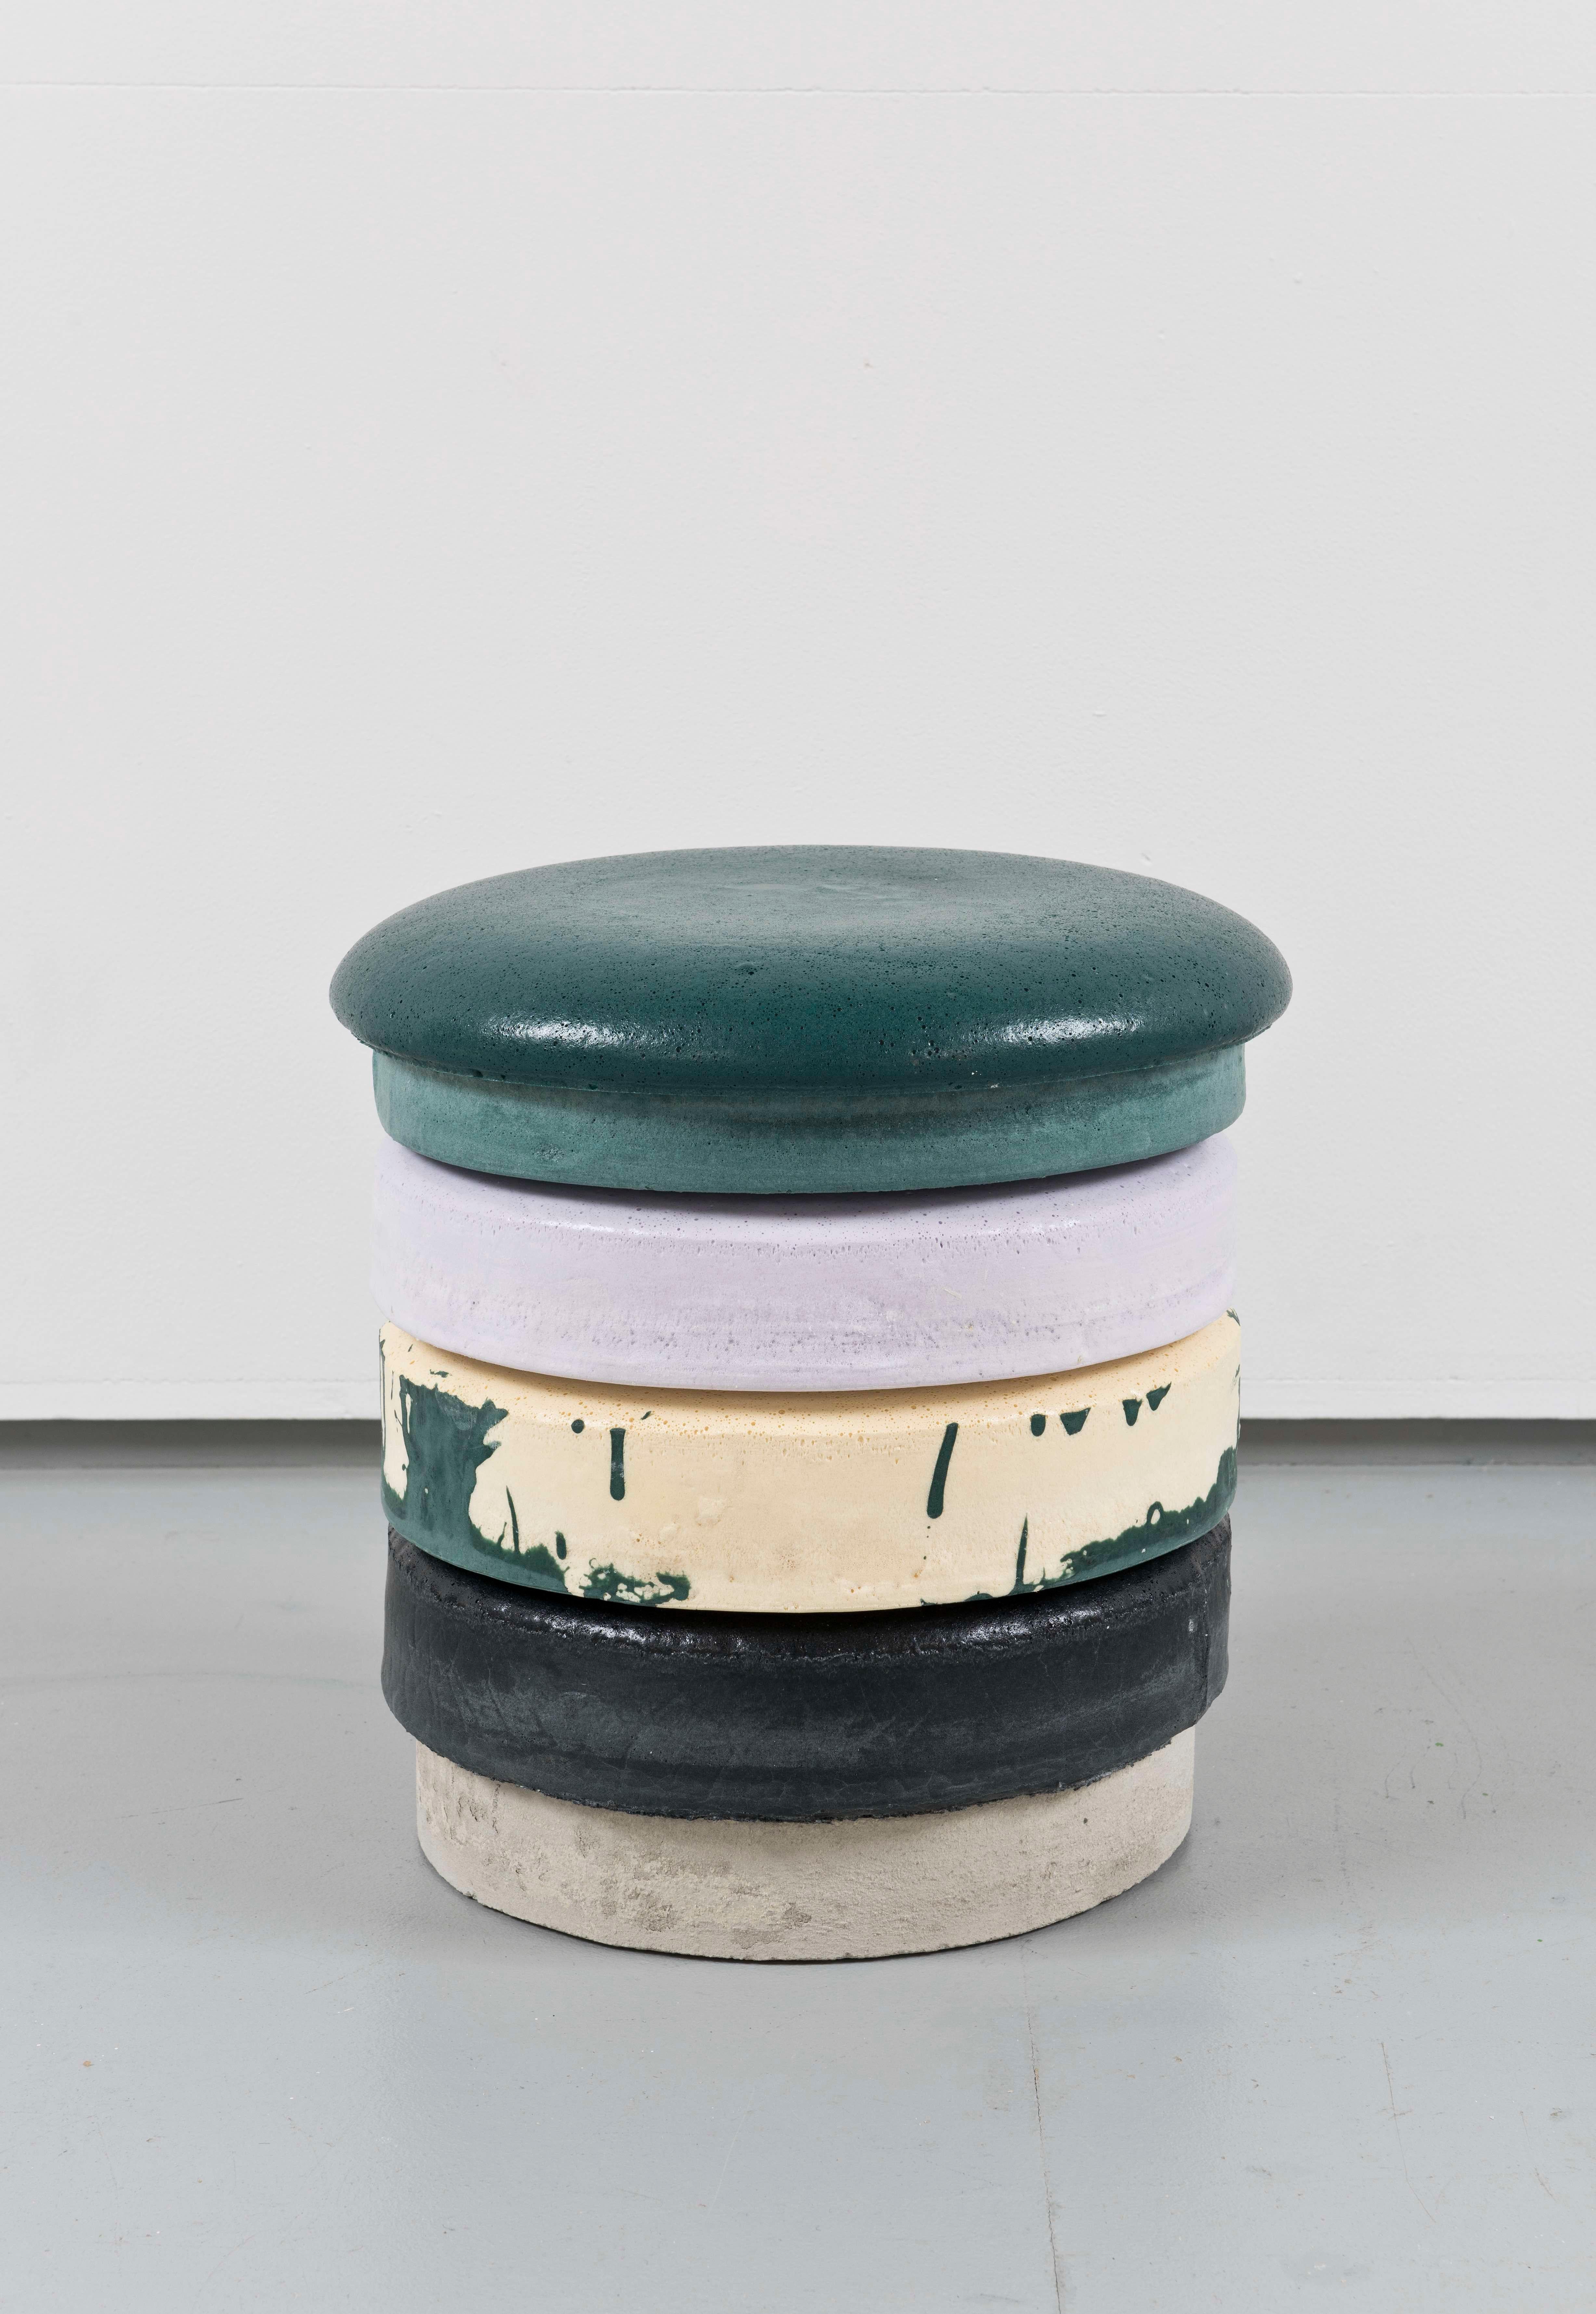 Cristian Andersen
Macaron stool, 2020
Each unique, signed by the artist
Polyurethane, pigments, concrete and cork
Measures: H 39 cm (15 3/8 in) ø 37 cm

Cristian Andersen (*1974) has been working at the interface between design and sculpture